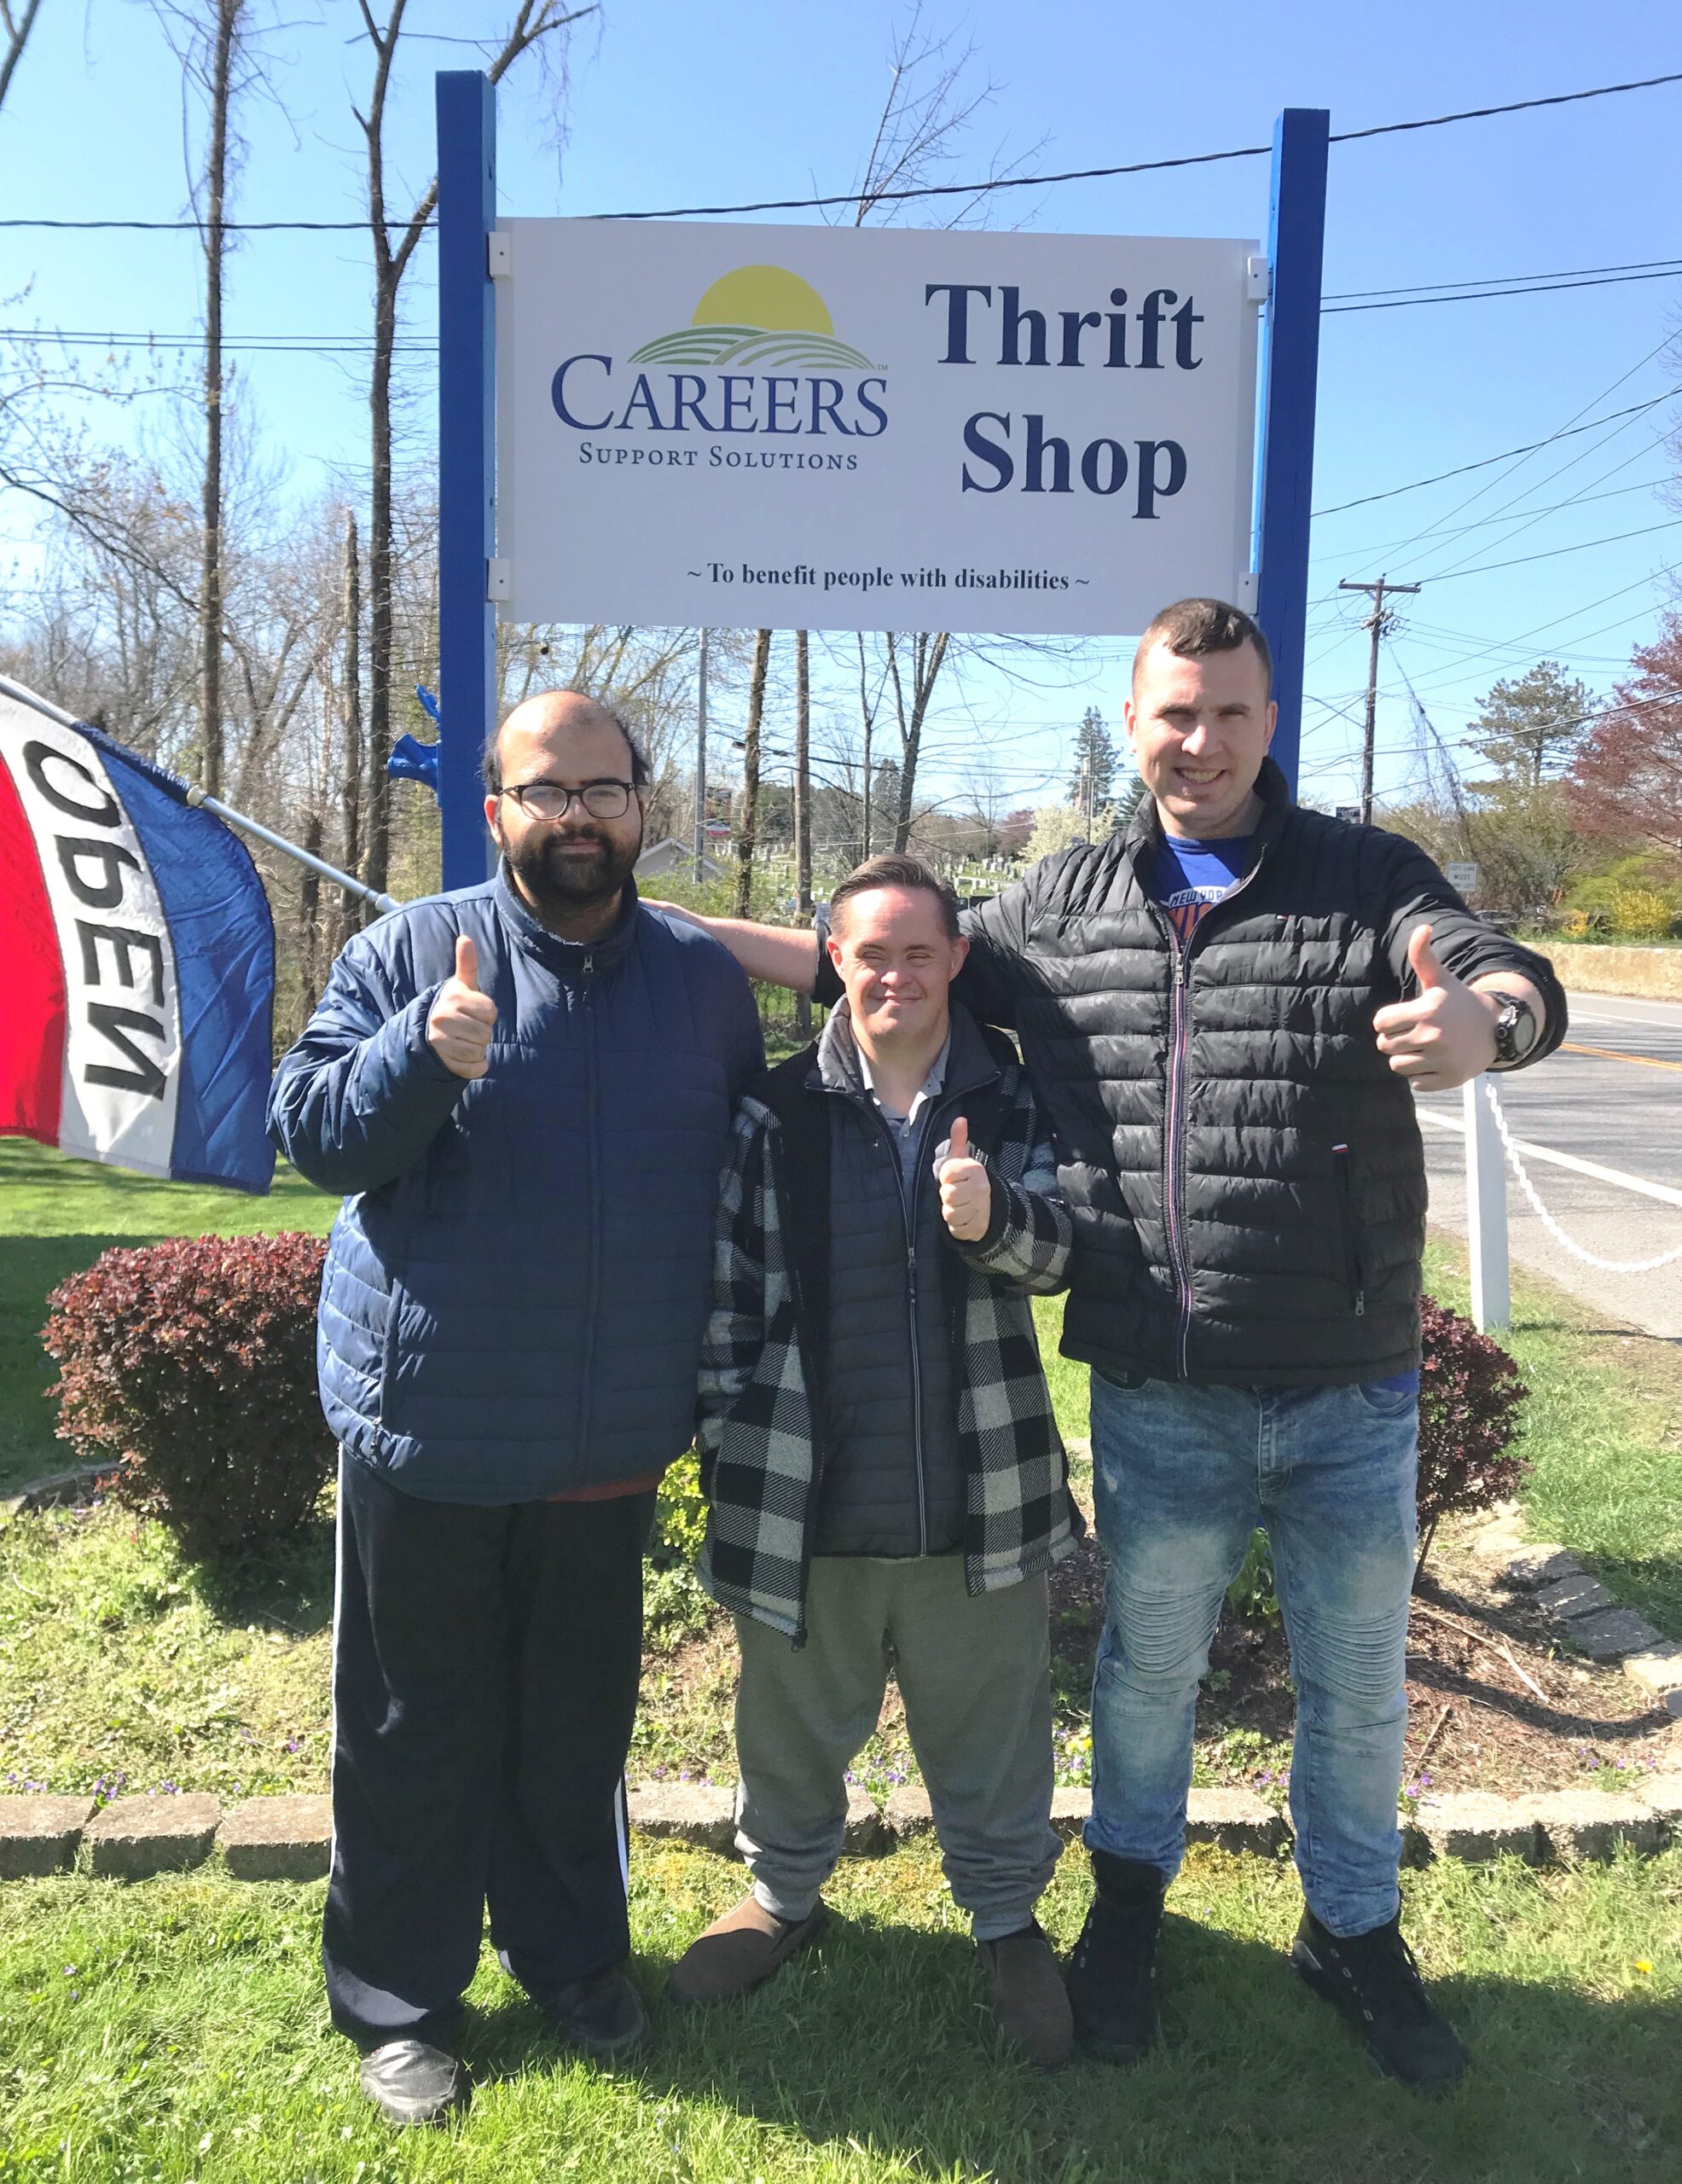 Harpal, Freddy, and Michael at Opening of CARFEERS Thrift Shop